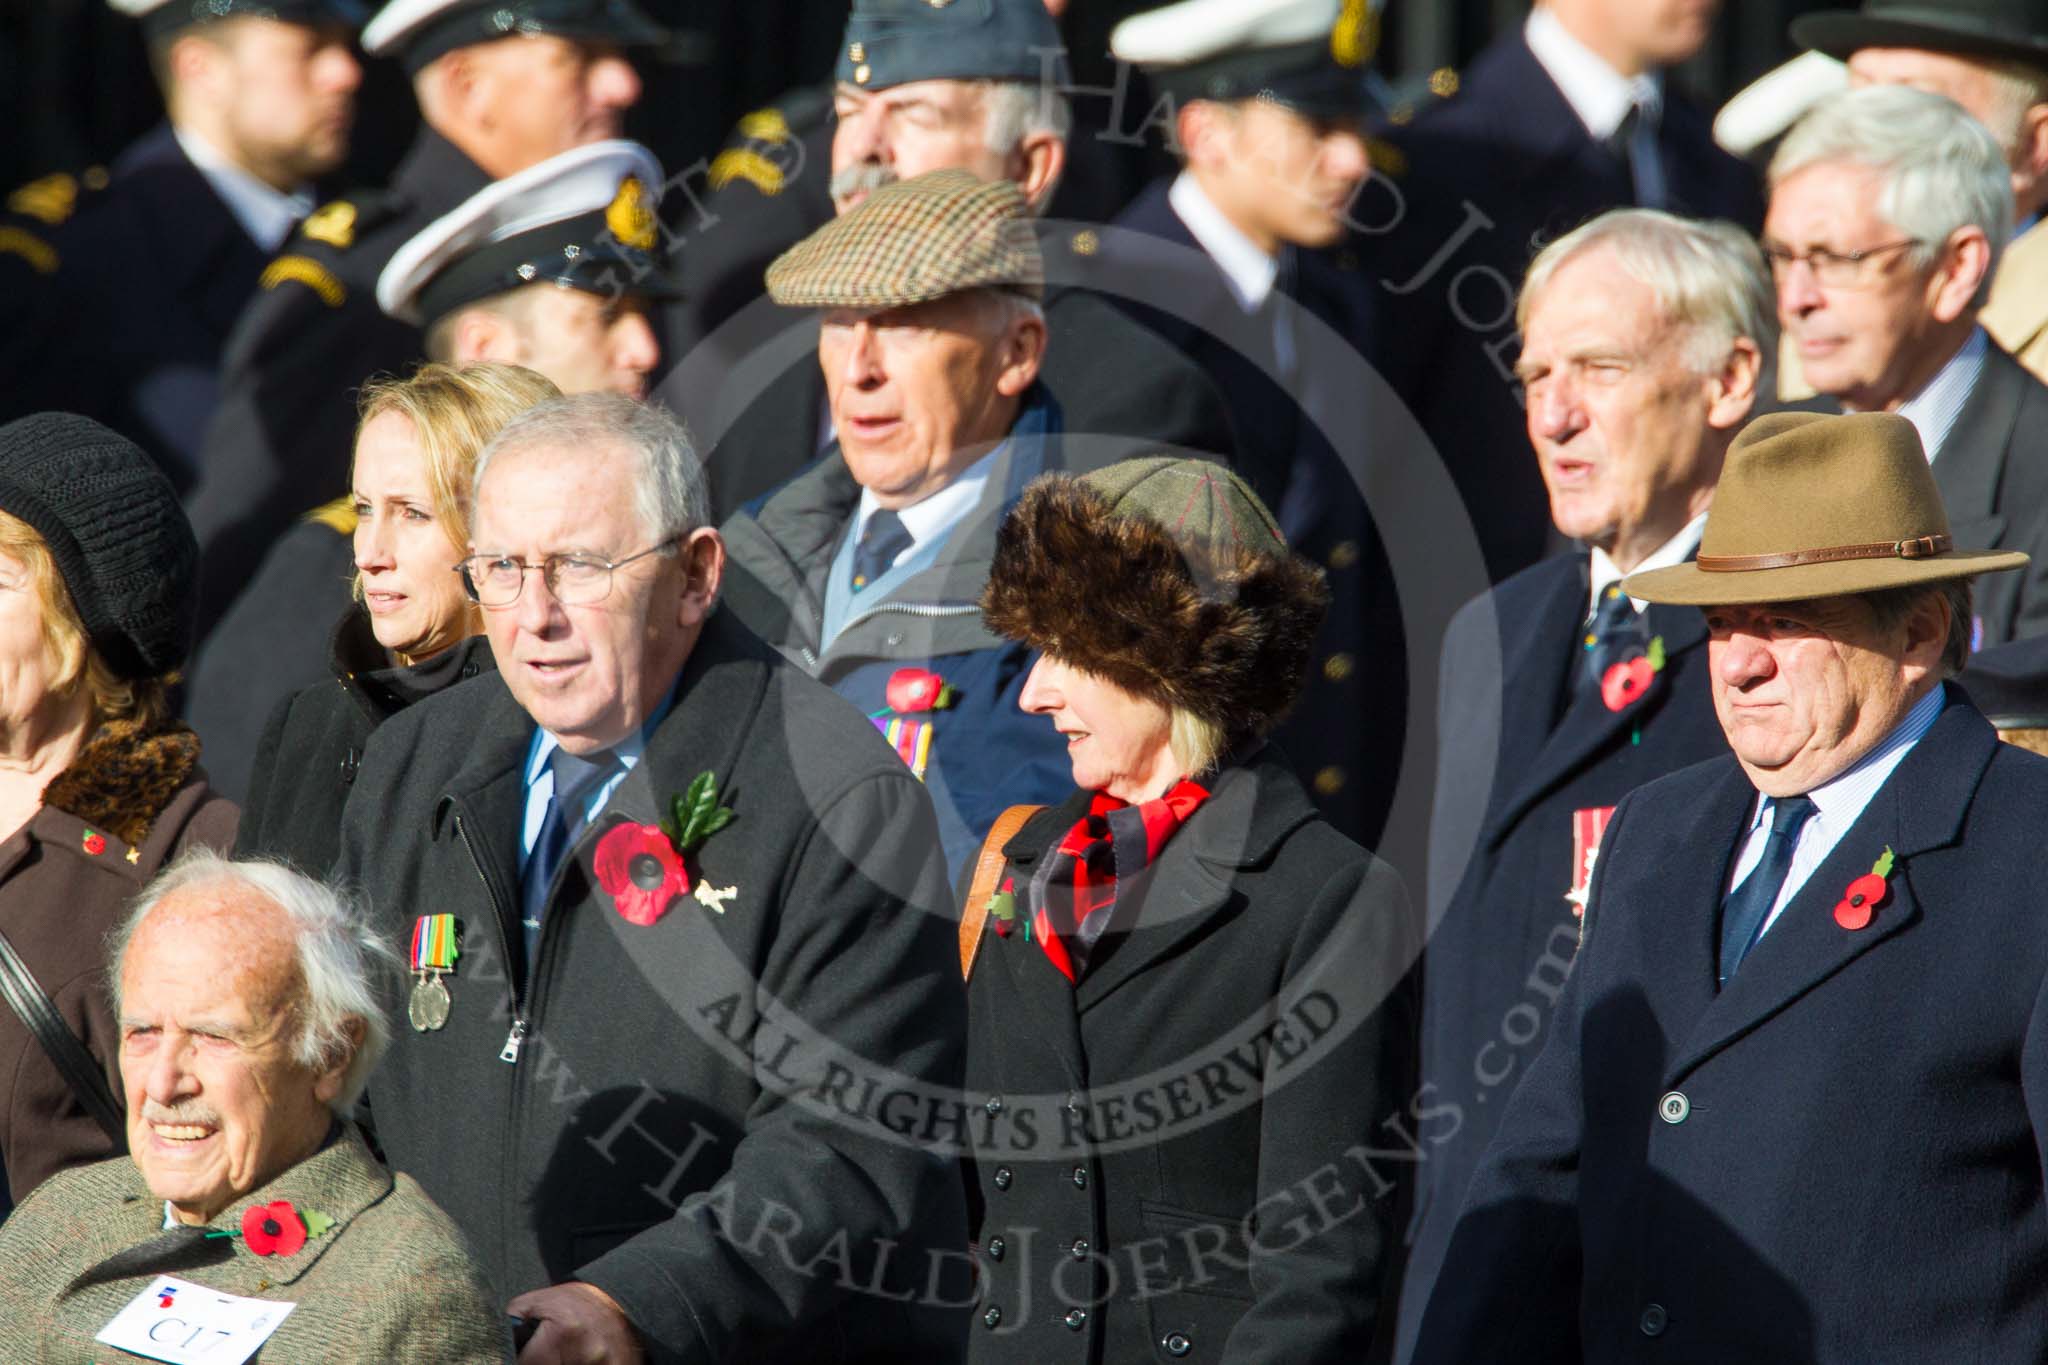 Remembrance Sunday at the Cenotaph in London 2014: Group C17 - Blenheim Society.
Press stand opposite the Foreign Office building, Whitehall, London SW1,
London,
Greater London,
United Kingdom,
on 09 November 2014 at 11:40, image #154